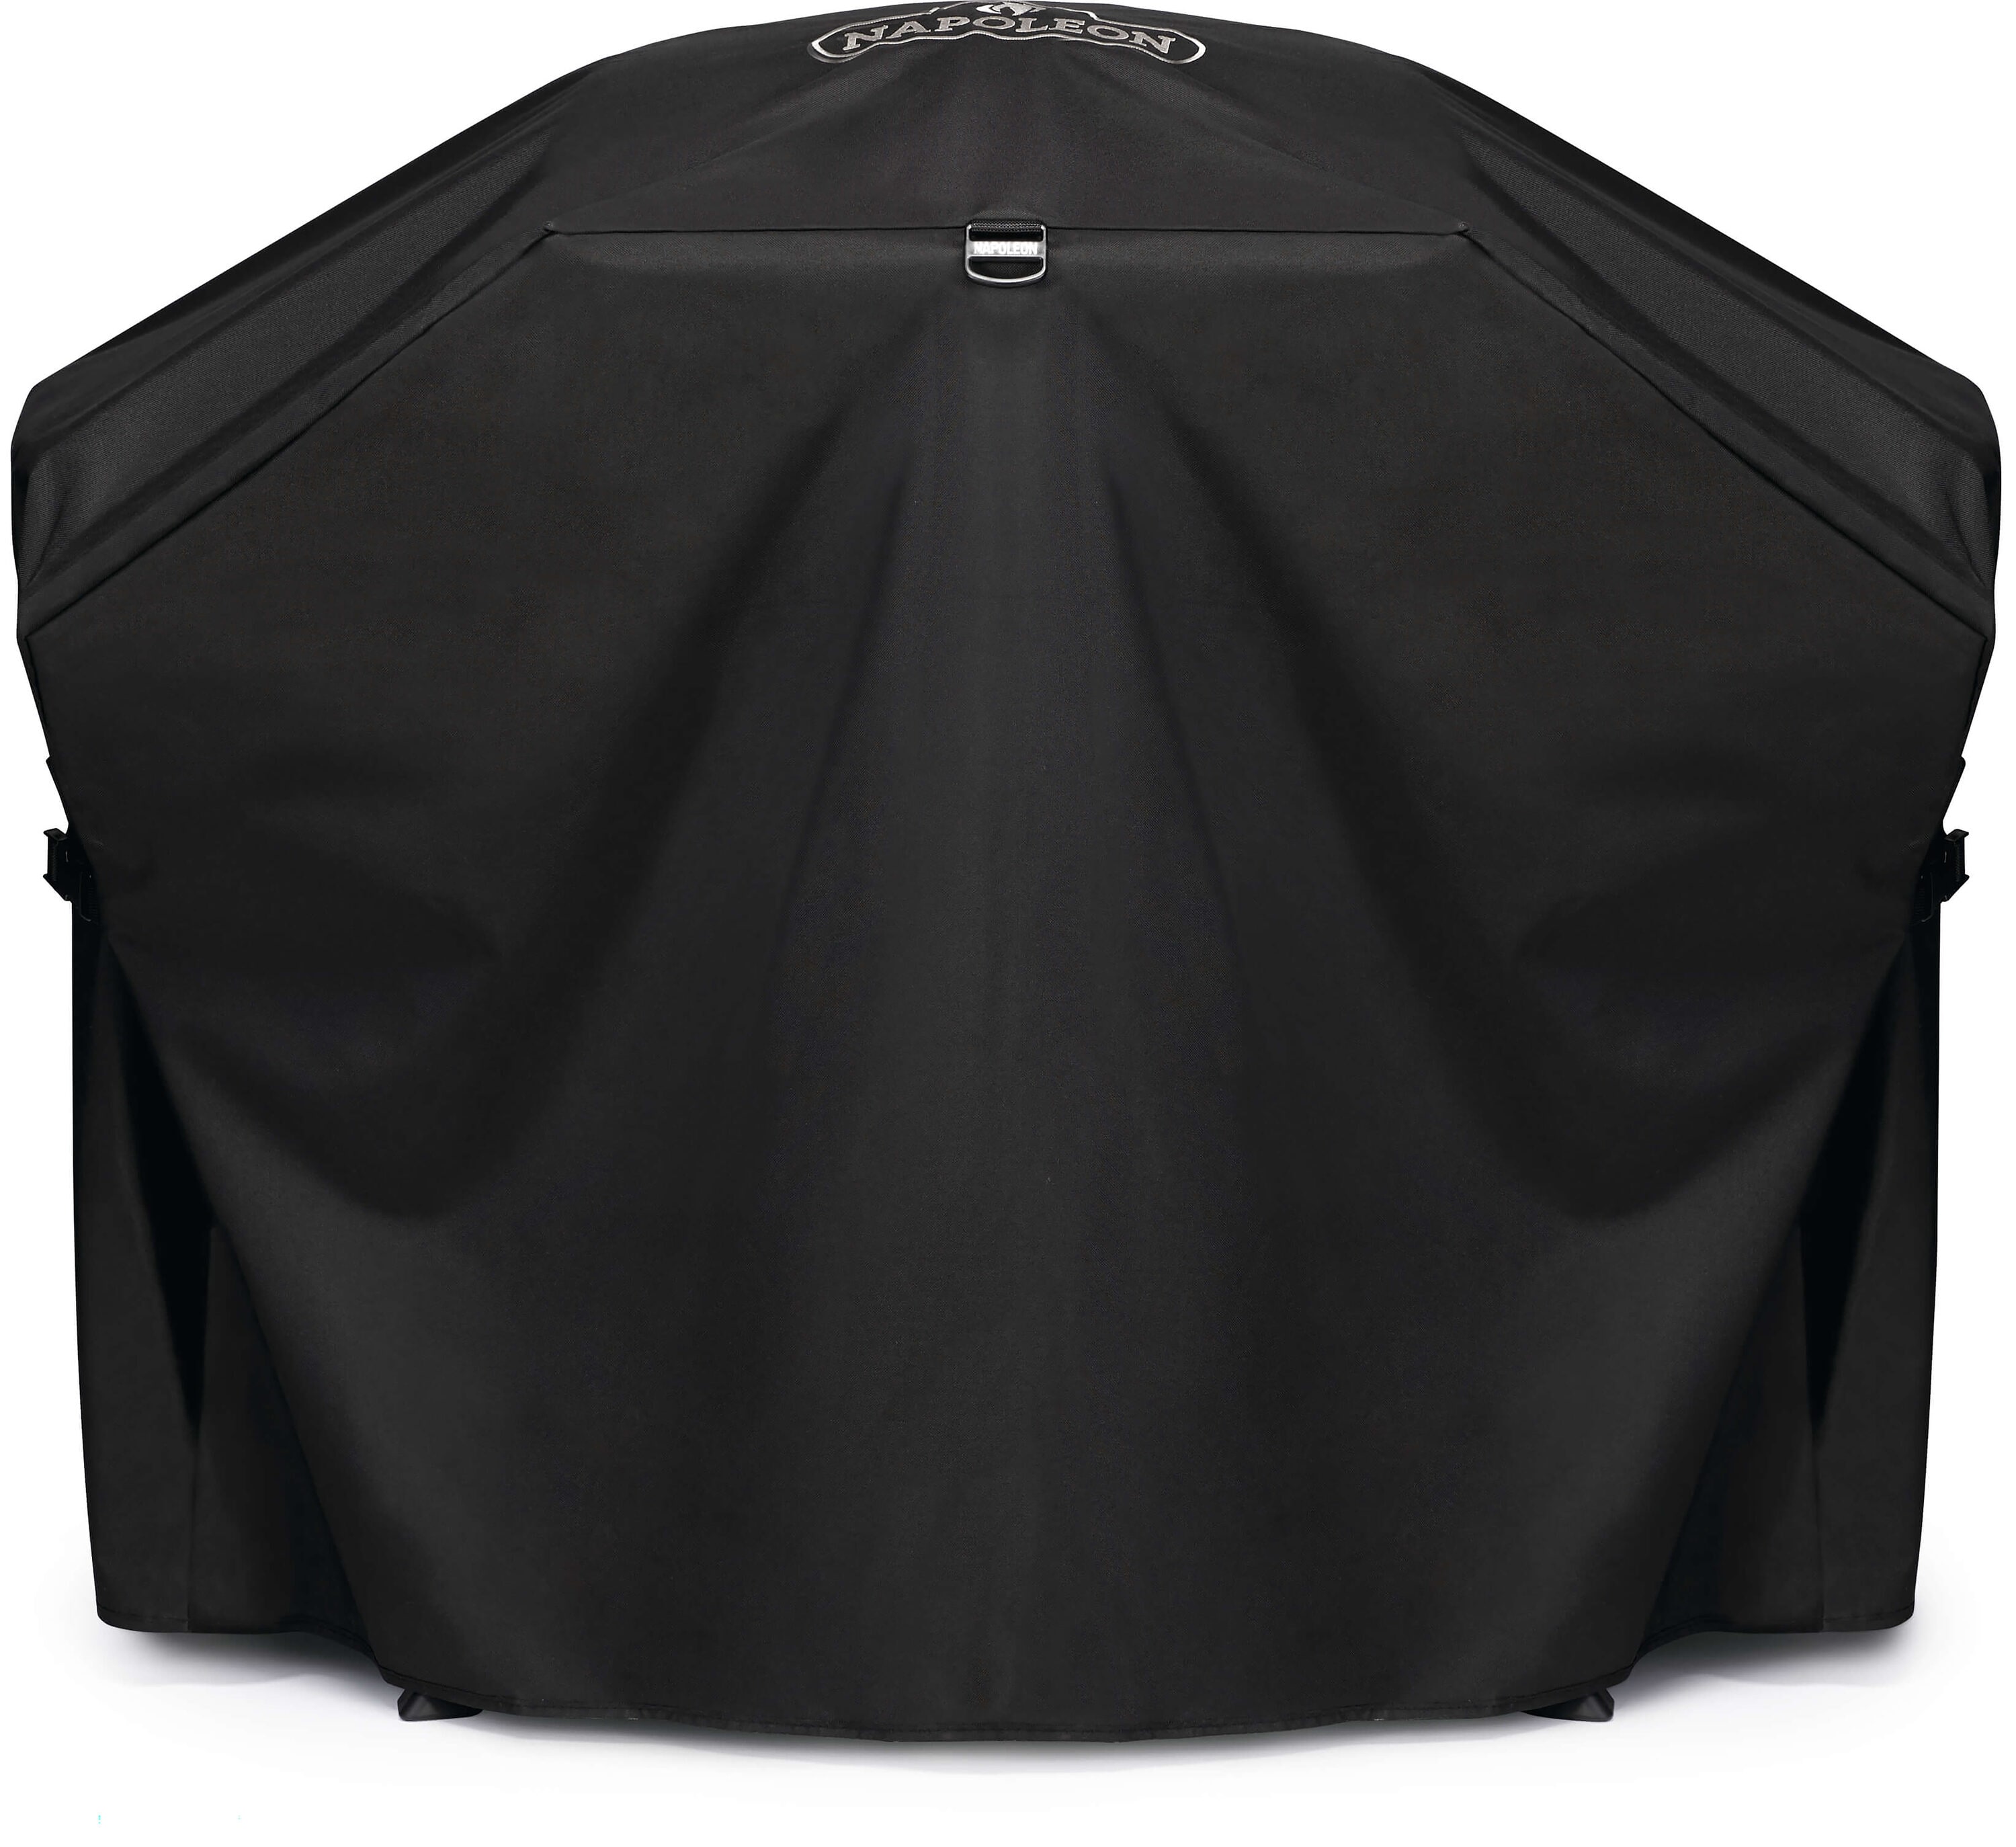 NAPOLEON Travel Q and PRO 285X Scissor Cart 46-in W x 38-in H Black Gas  Grill Cover in the Grill Covers department at